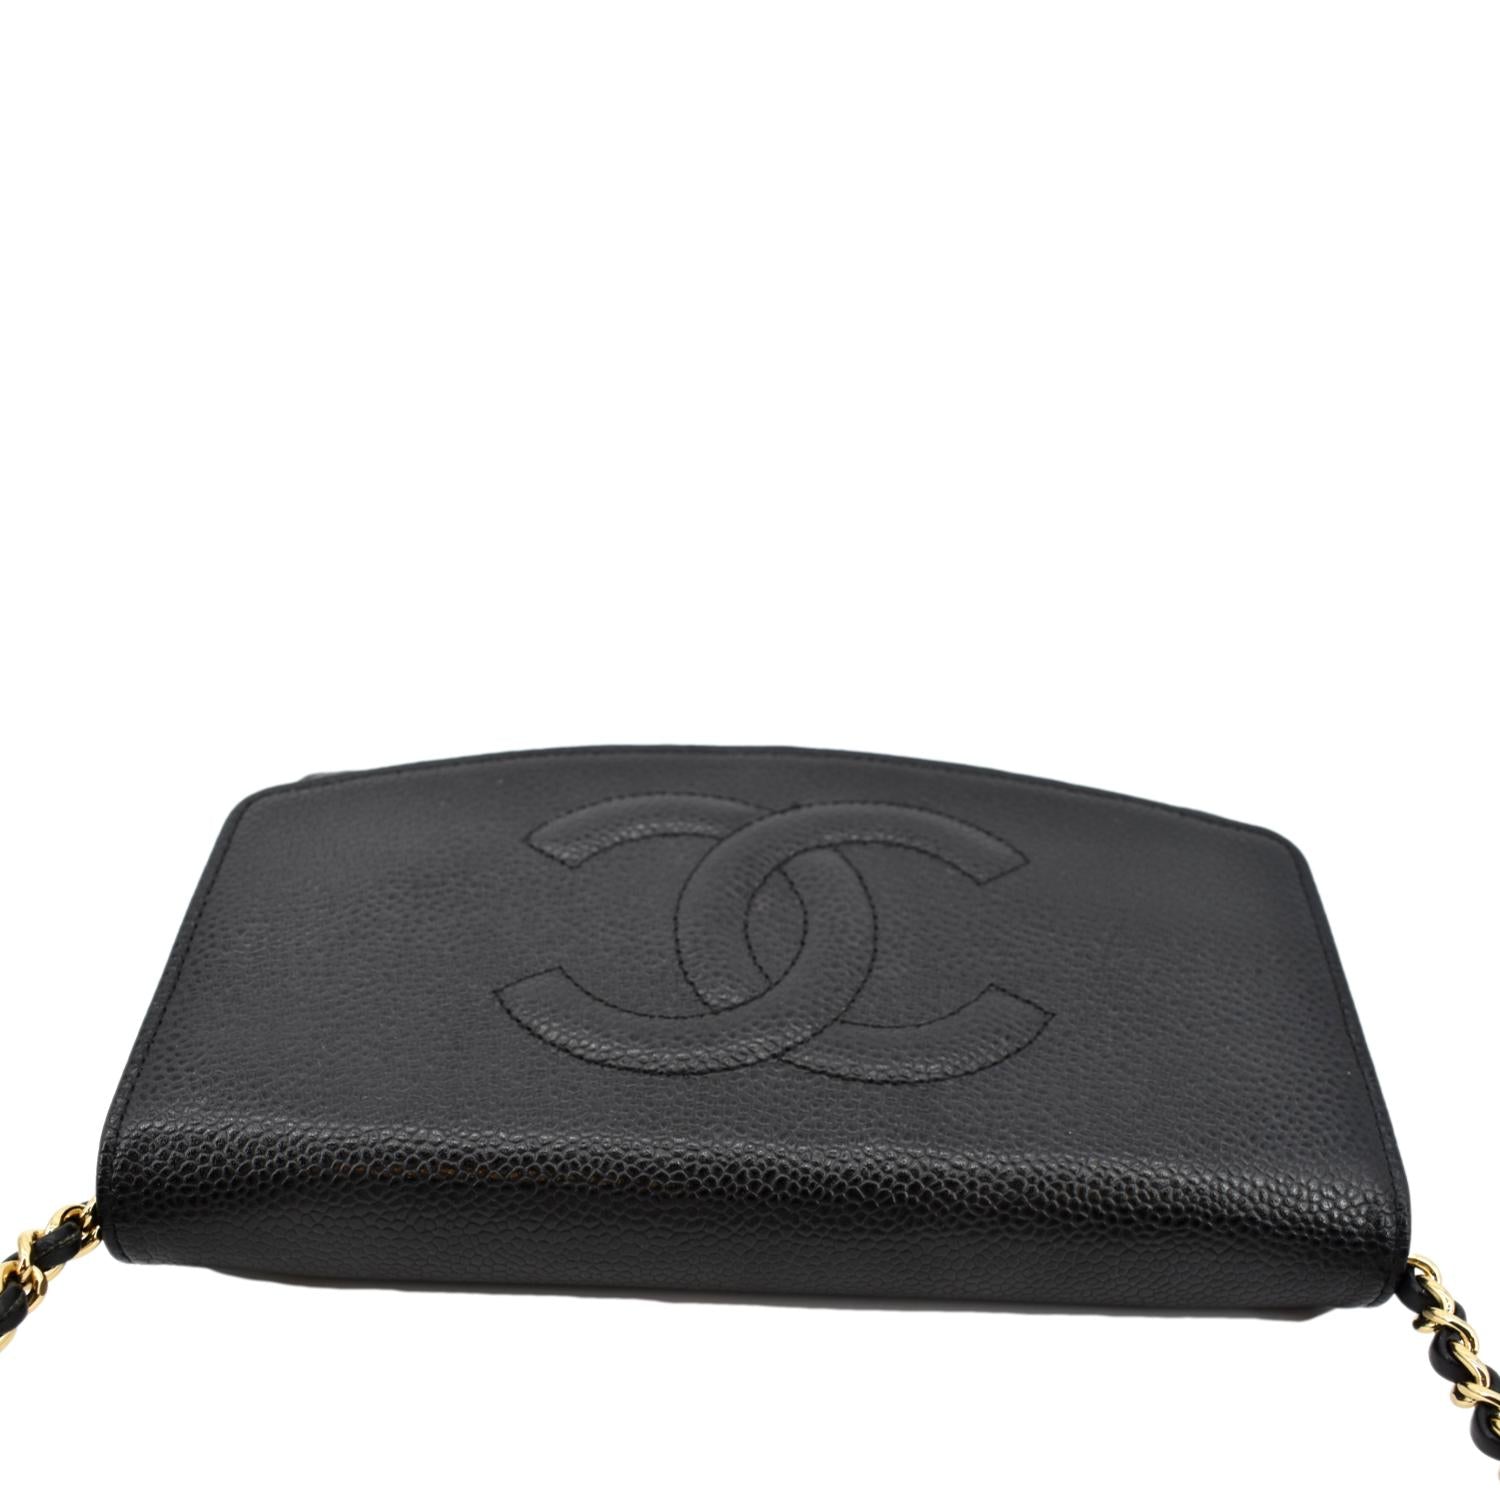 Timeless/classique leather wallet Chanel Black in Leather - 30566739